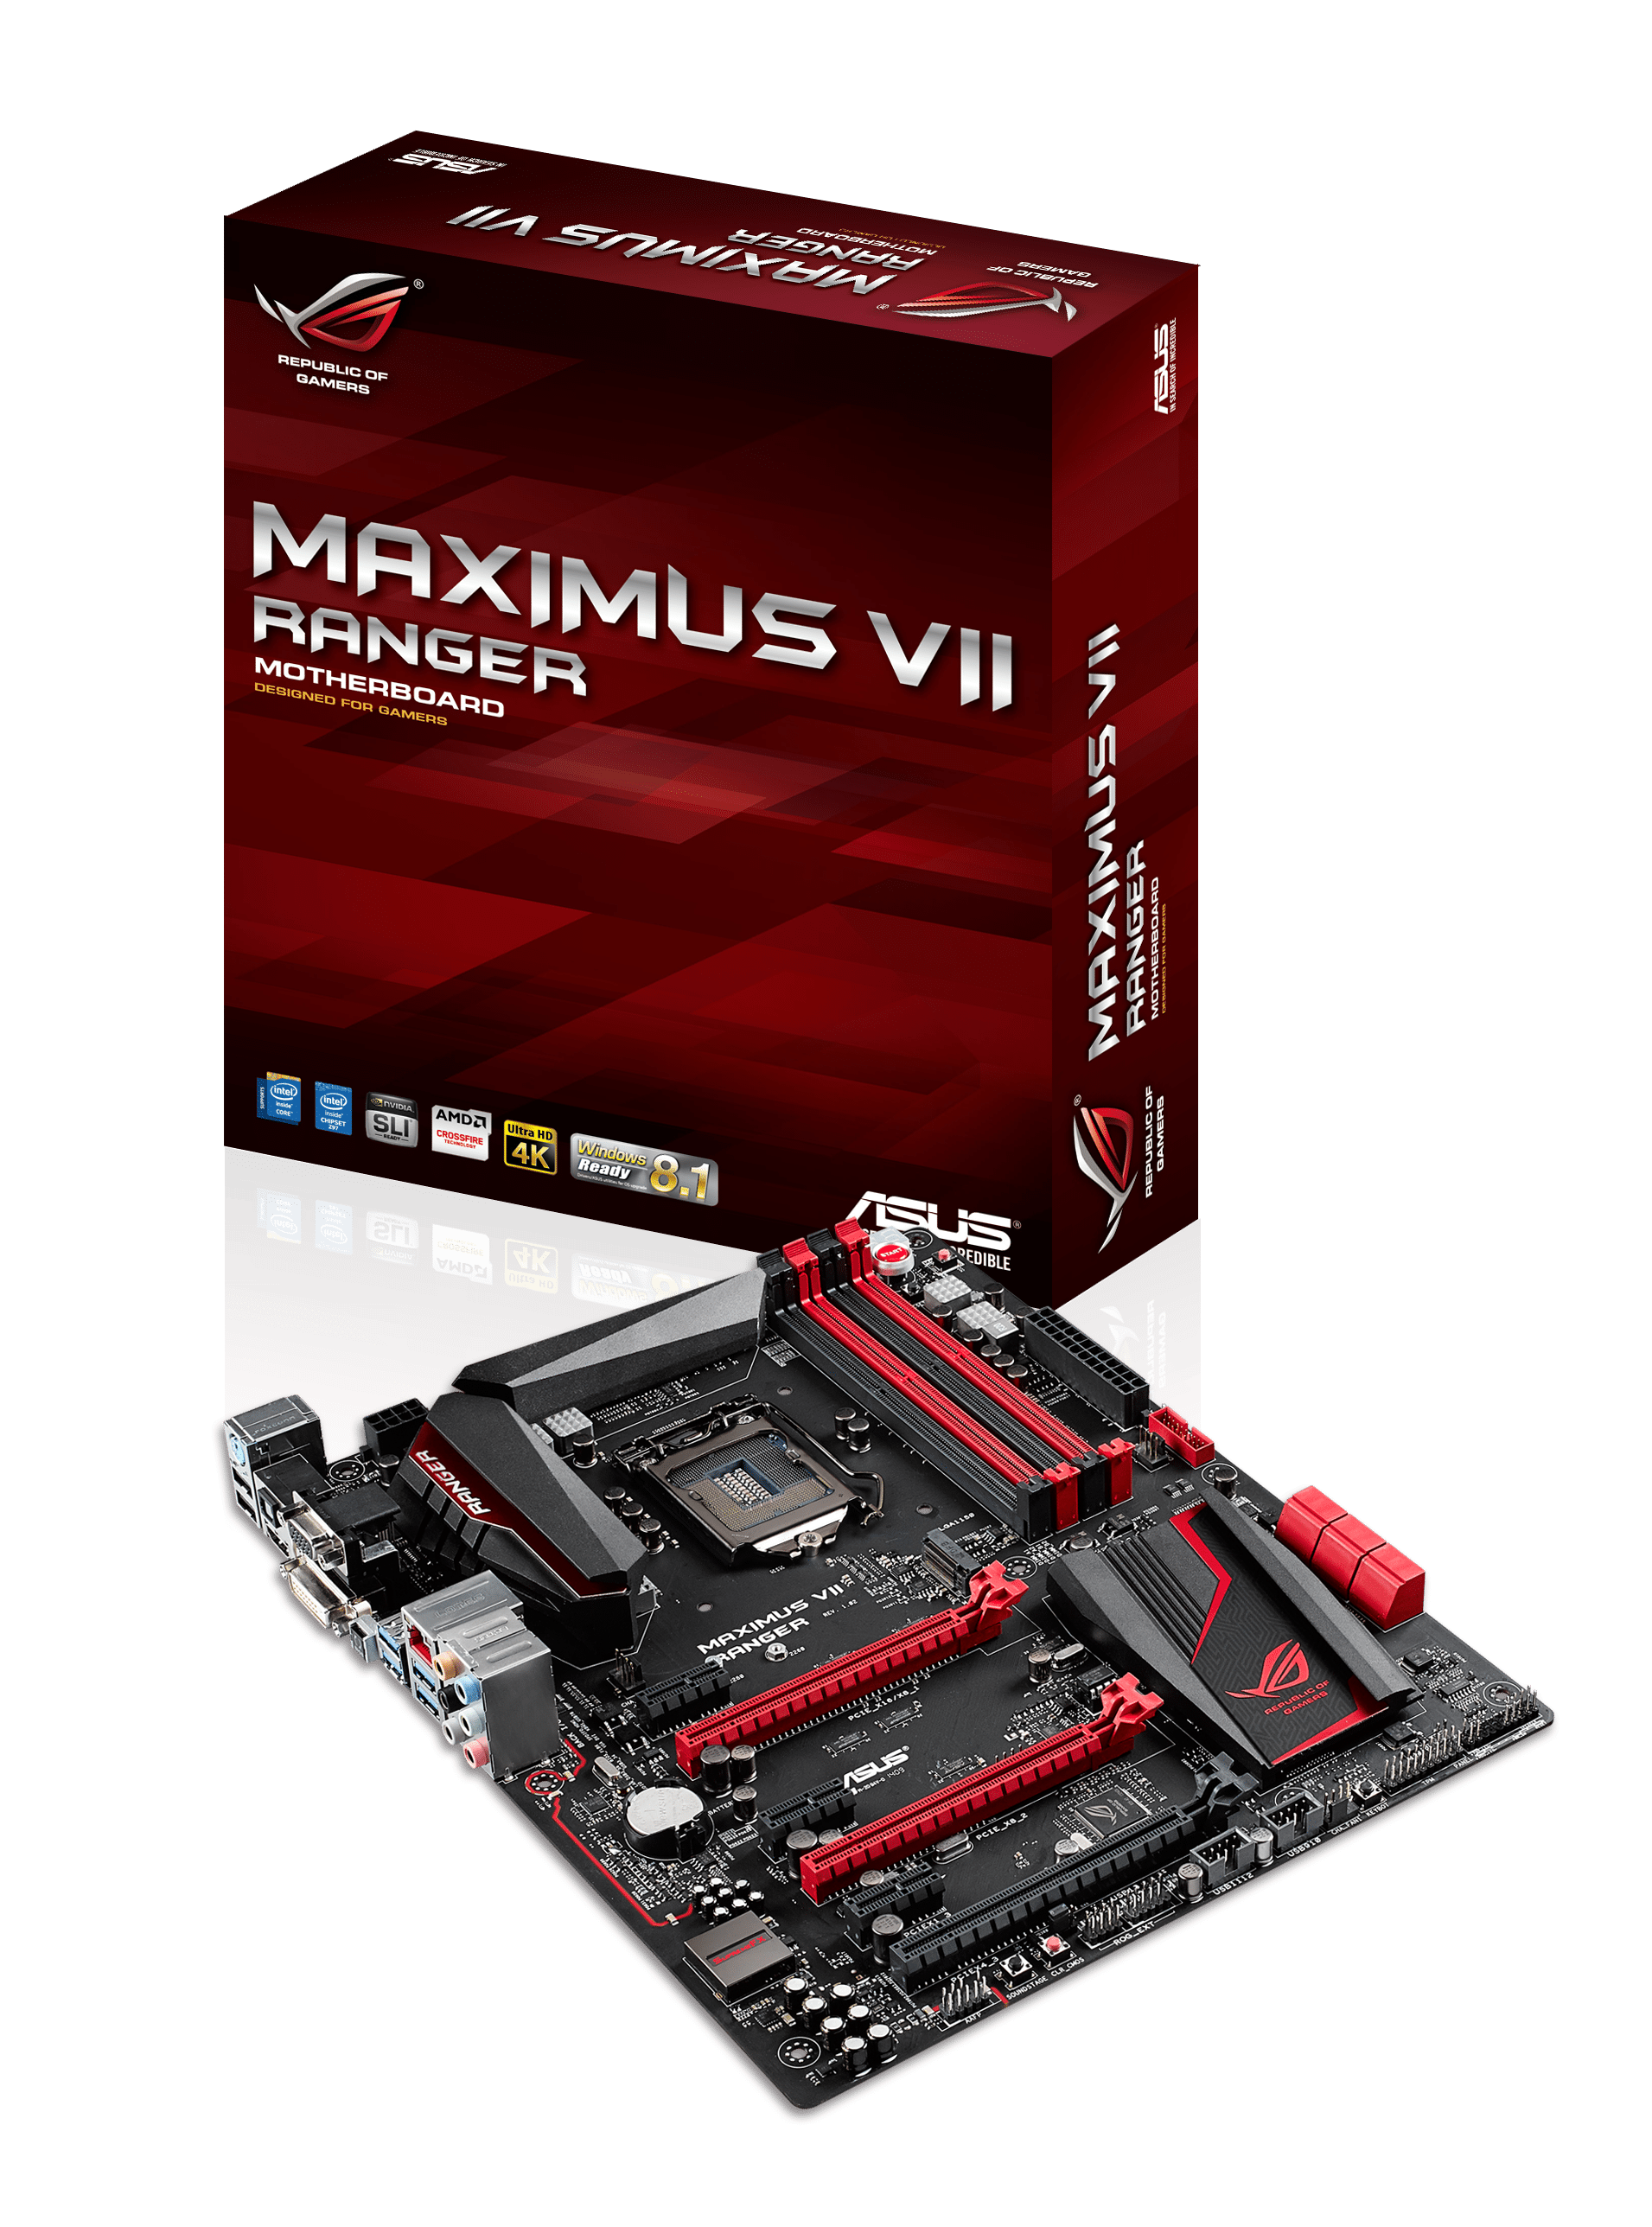 ASUS Introduces Three Intel Z97 based Maximus VII Gaming Motherboards 29